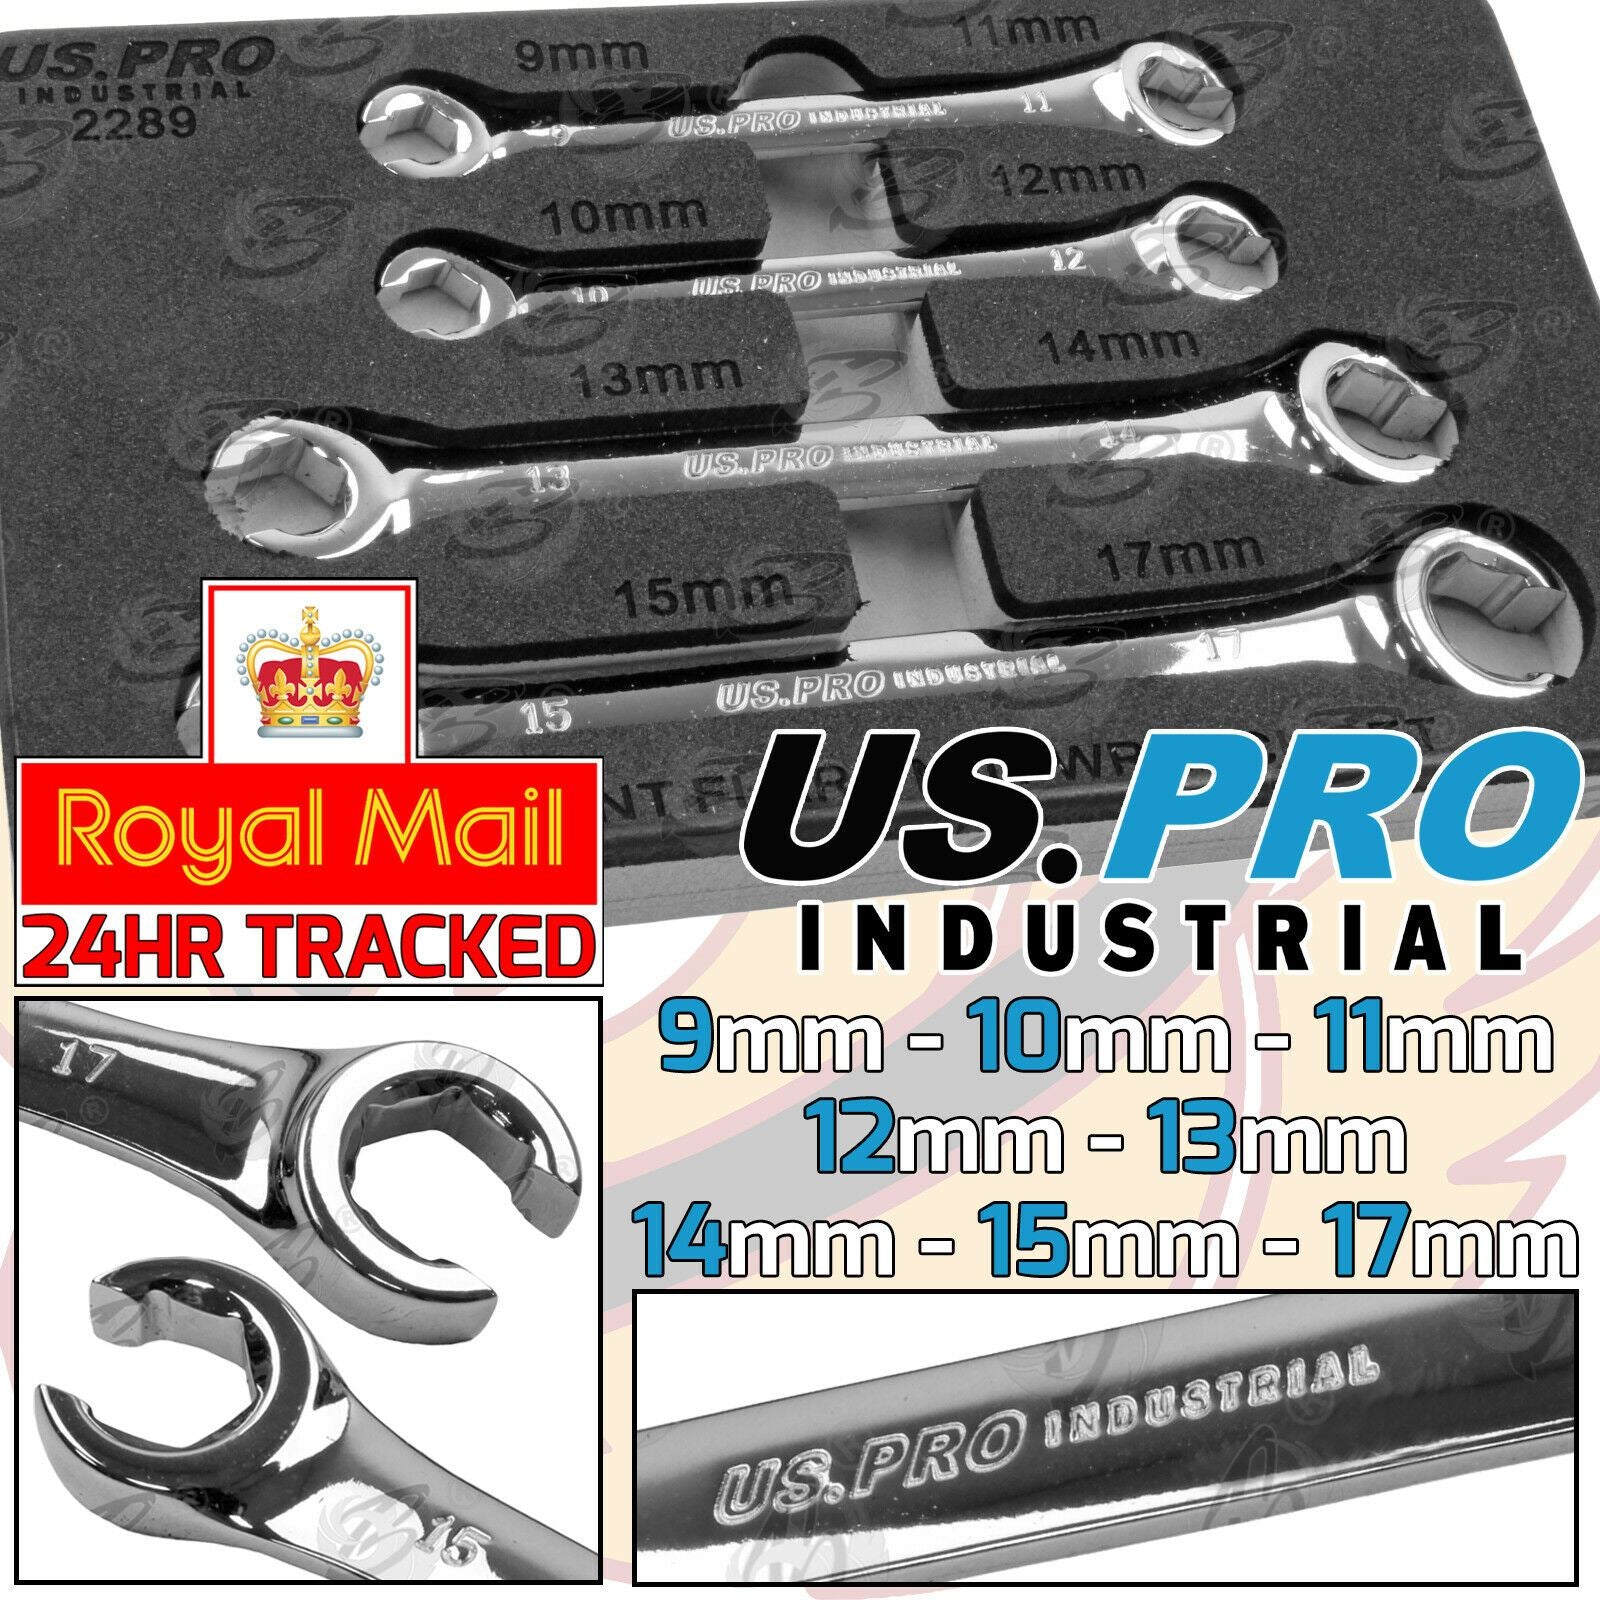 US PRO INDUSTRIAL 4PCS 6 POINT FLARE NUT SPANNERS 9MM - 17MM